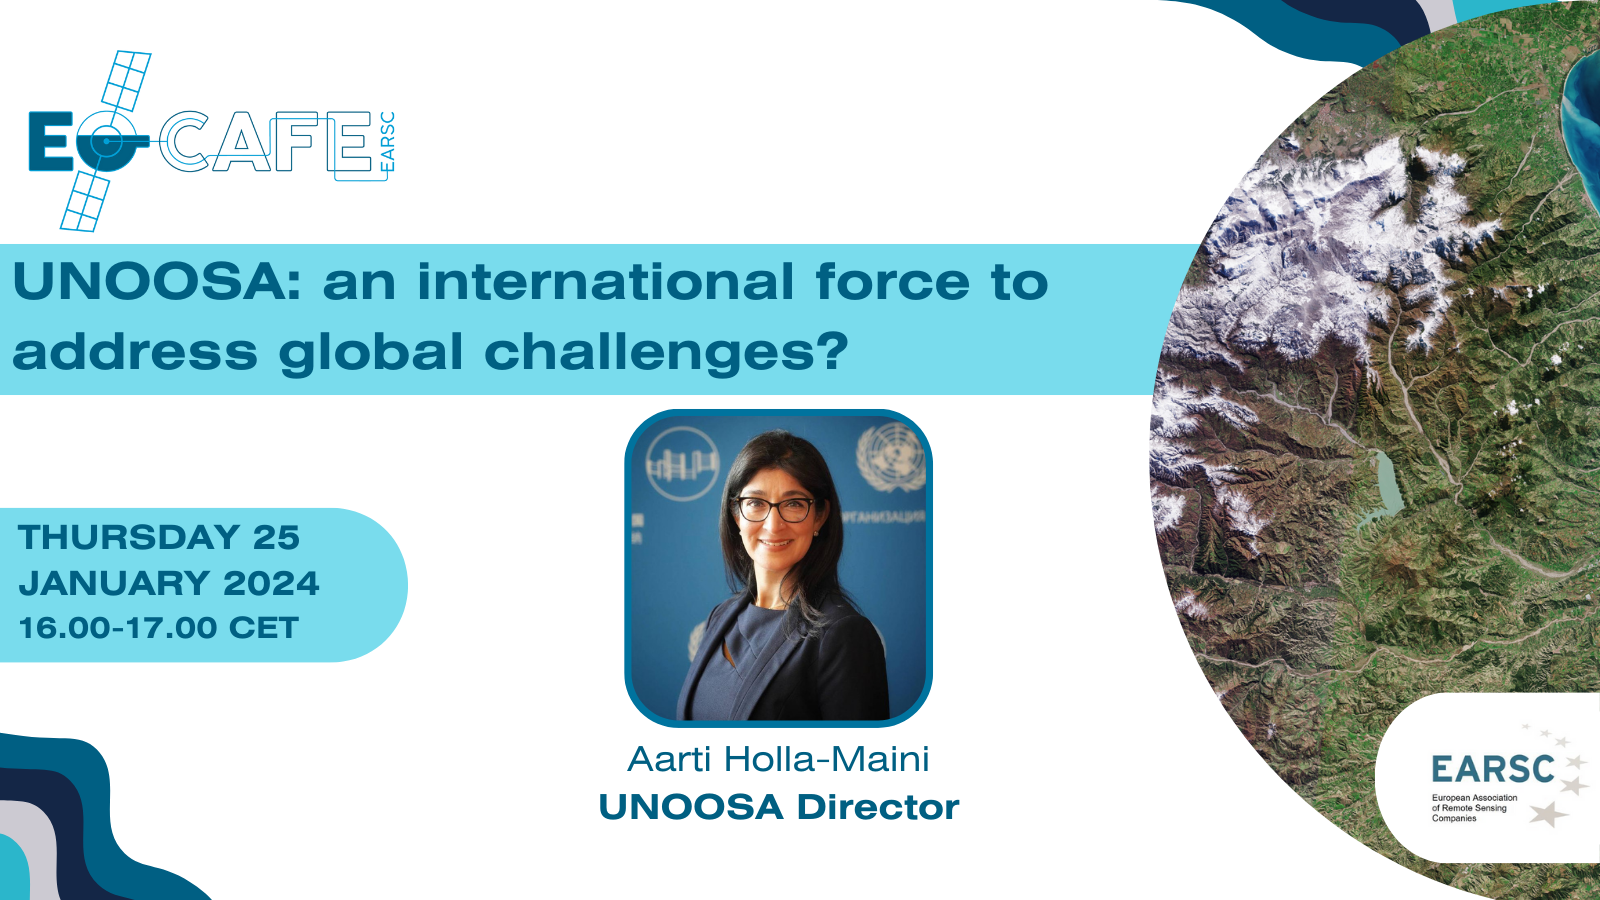 EOcafe: UNOOSA: an international force to address global challenges?